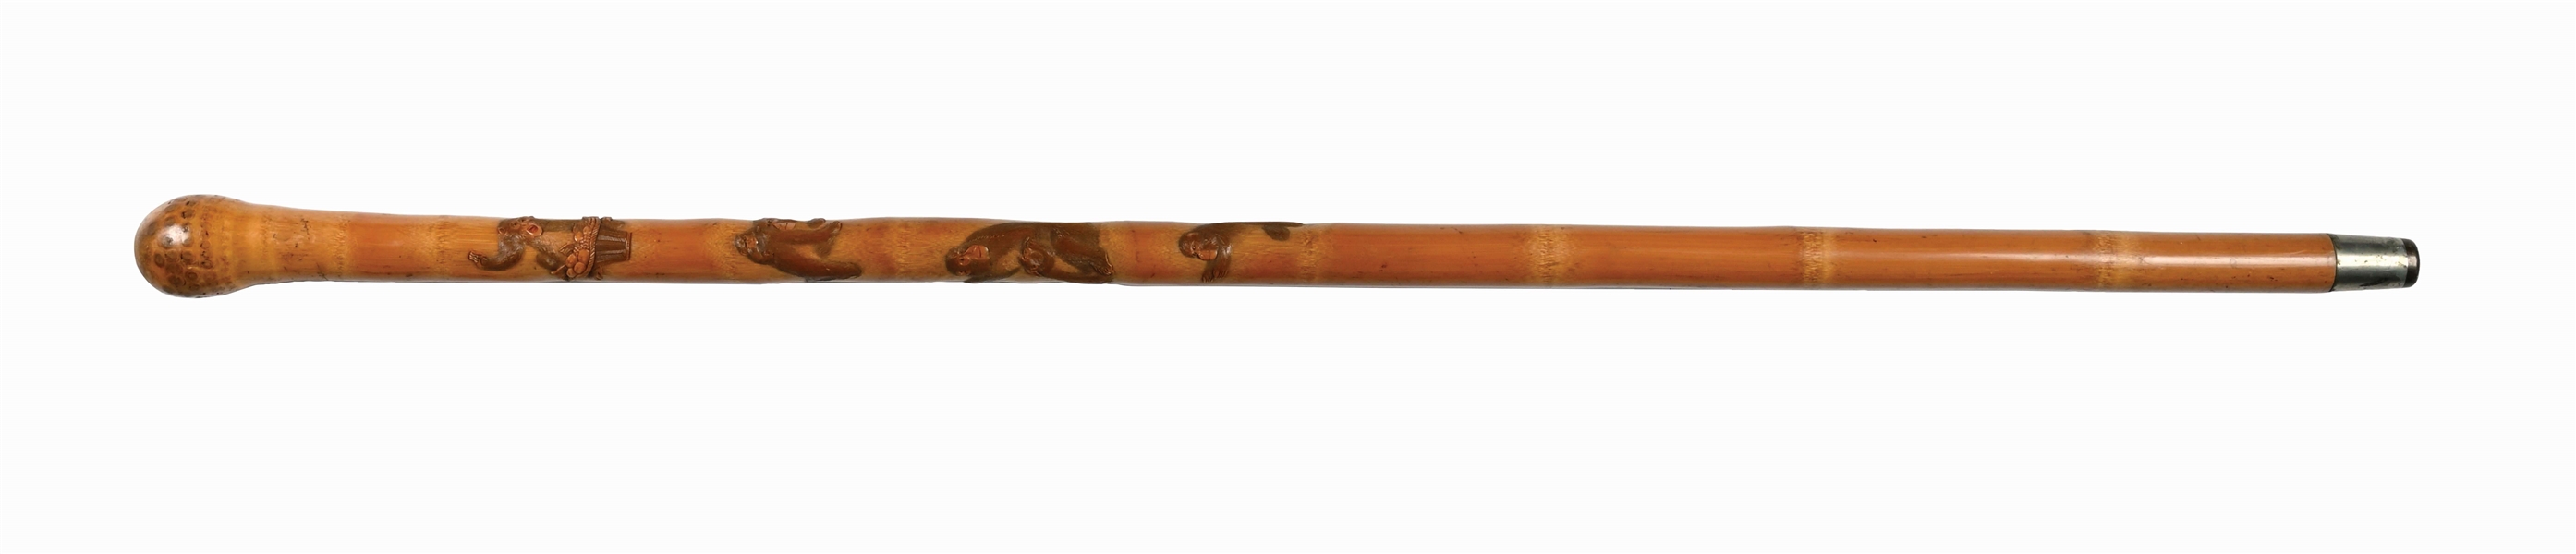 ANTIQUE WALKING STICK CANE W/ CARVED WOODEN SINGLE-PIECE CANE W/ 5 EMBOSSED MONKEYS